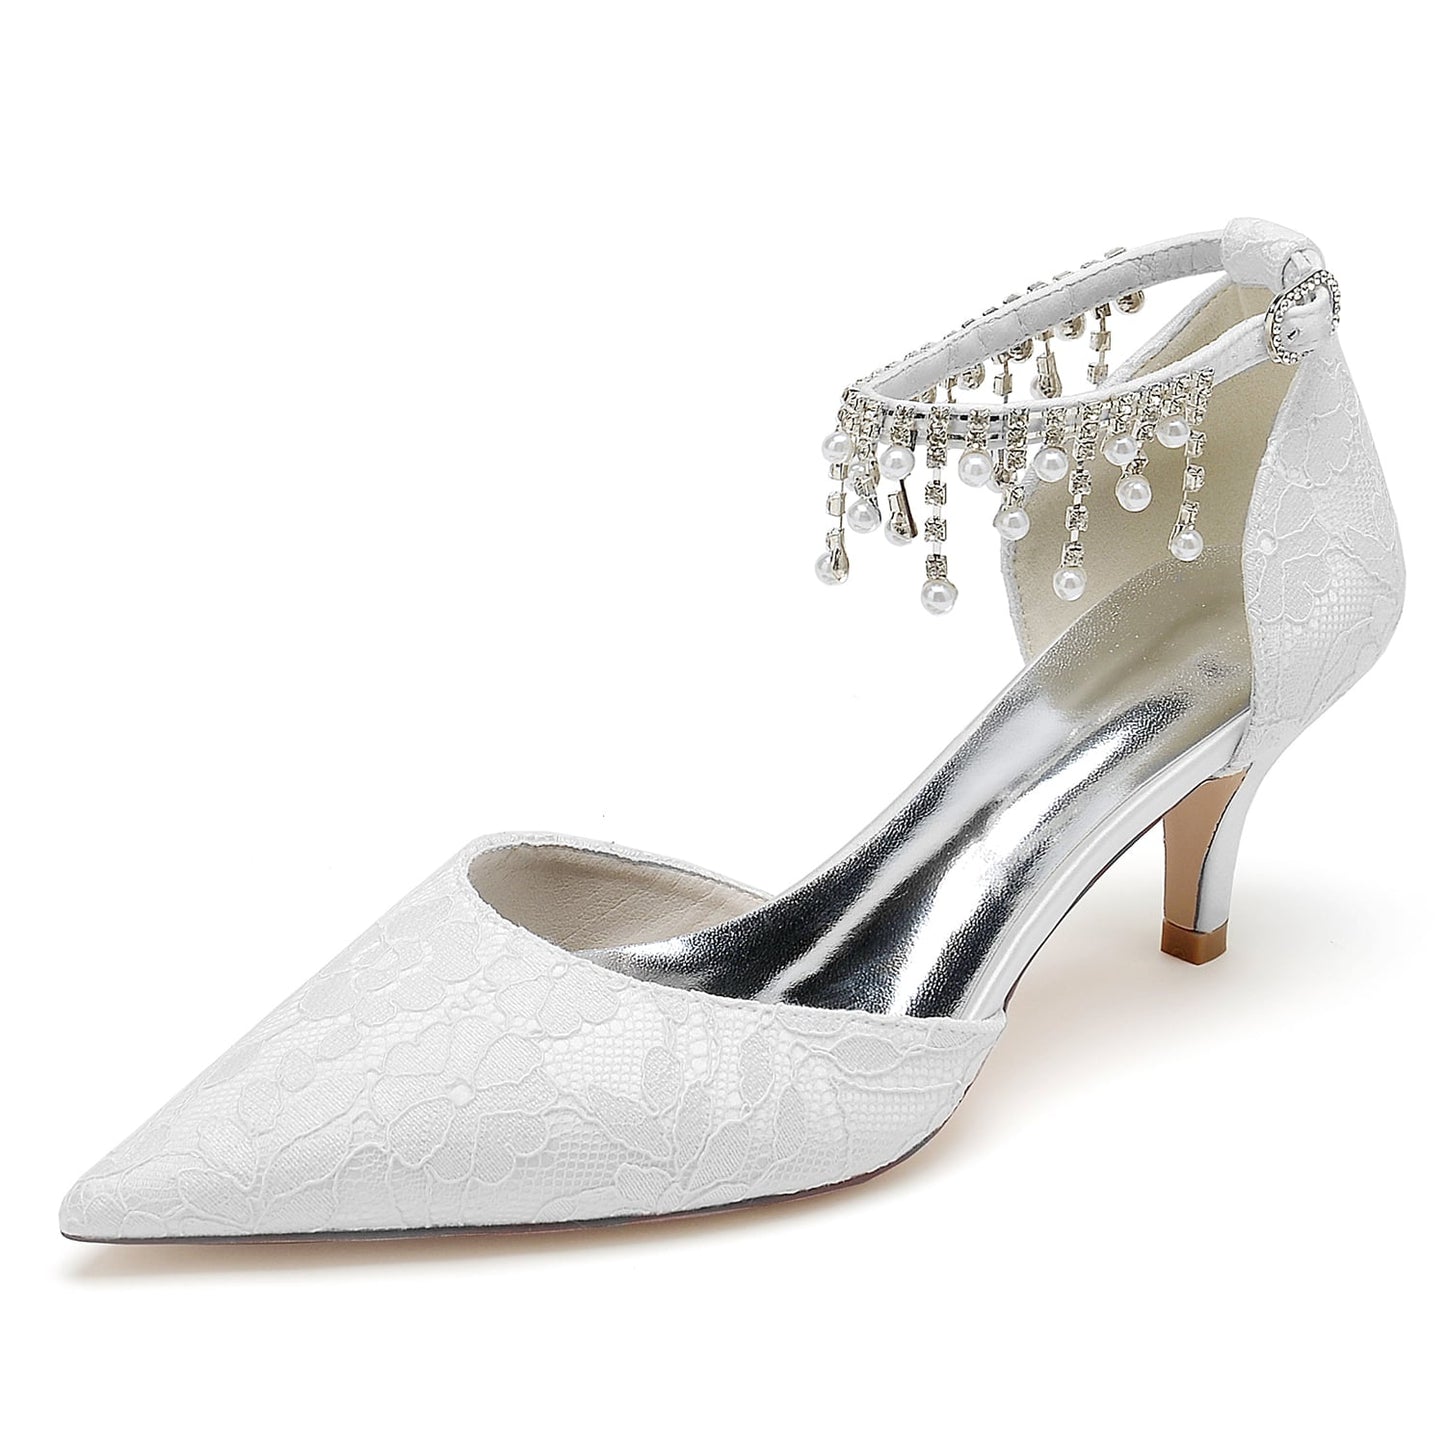 Low Heels Lace Wedding Heels Ankle Strap Shoes with Beaded Bridal Heels